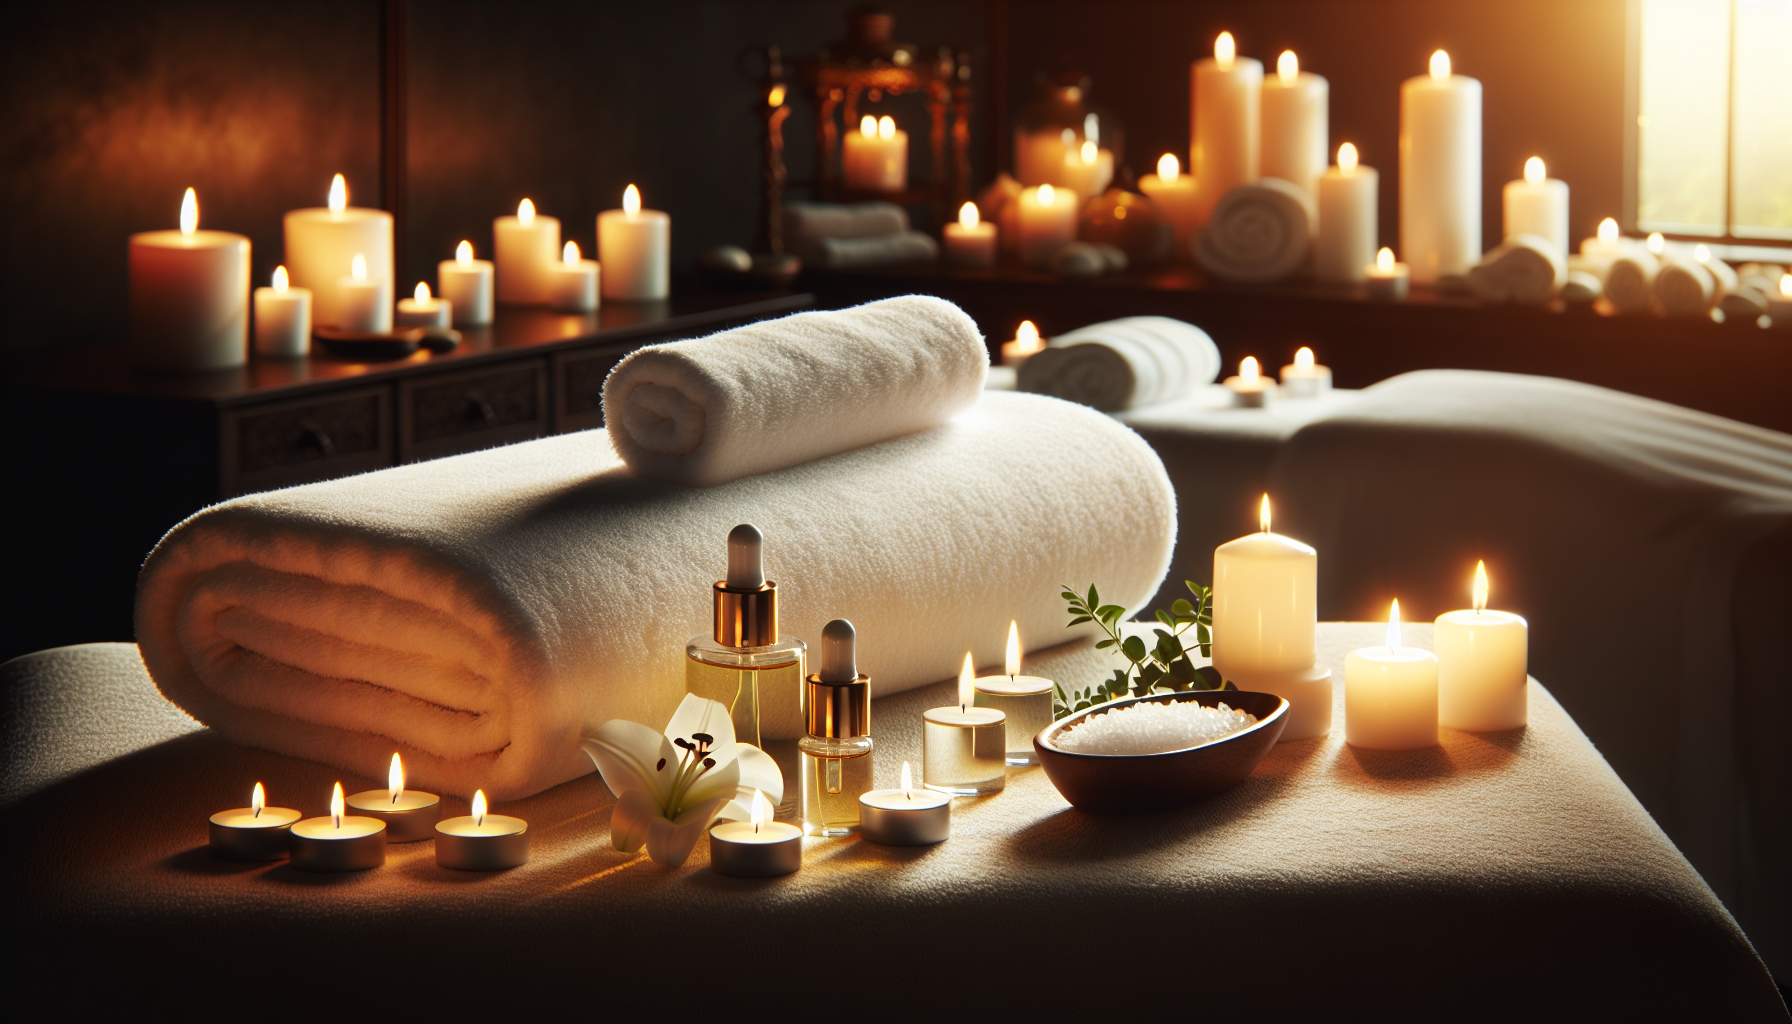 Which Hotels Near King Spa Dallas Offer Spa Services?